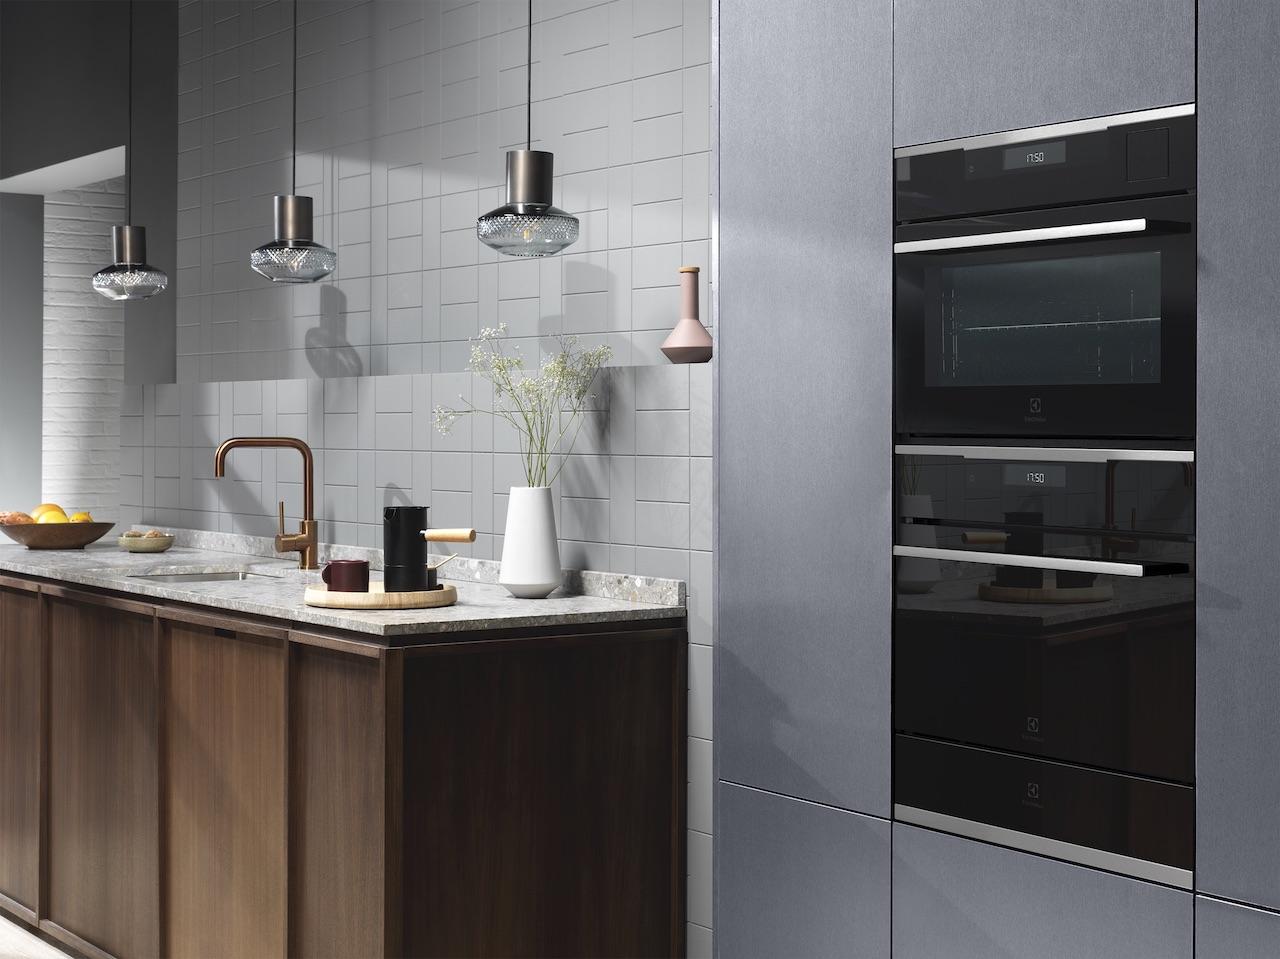 How Electrolux's State-Of-The-Art Appliances Can Elevate Your Kitchen